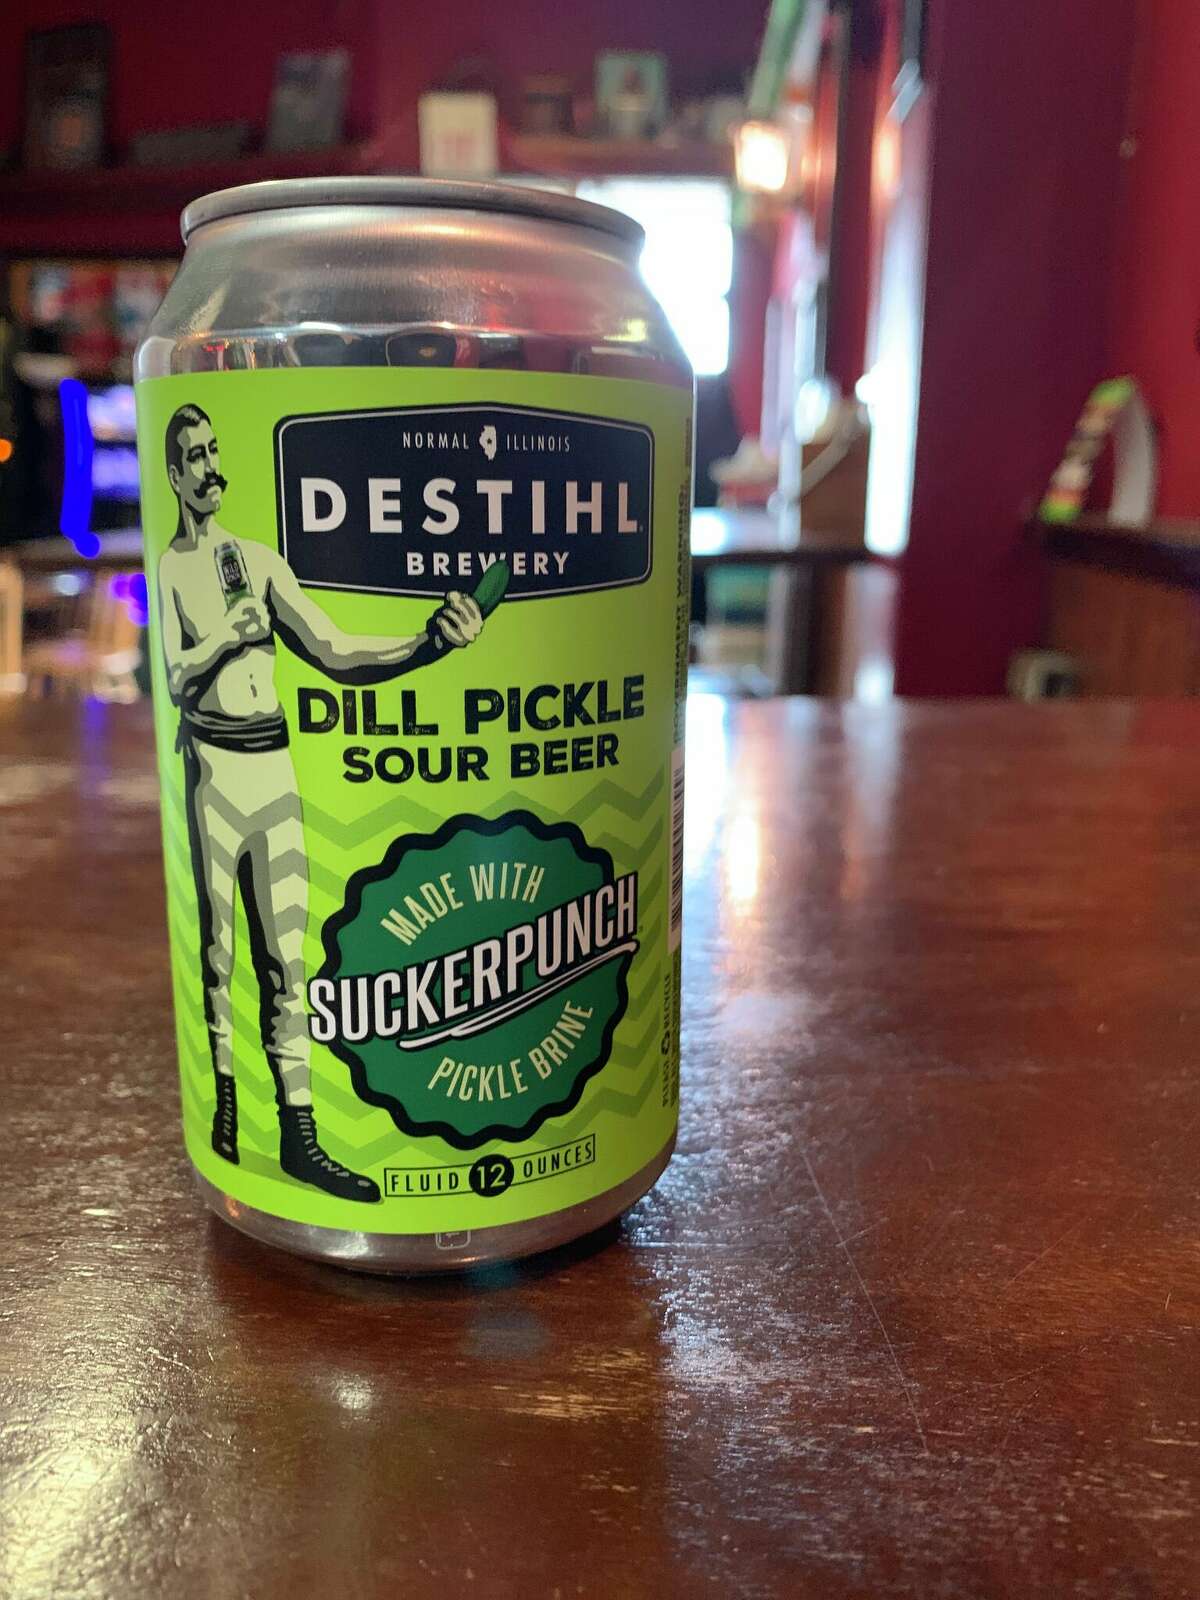 DESTIHL promises bold flavor with its Dill Pickle Sour Beer — and delivers a little too well.